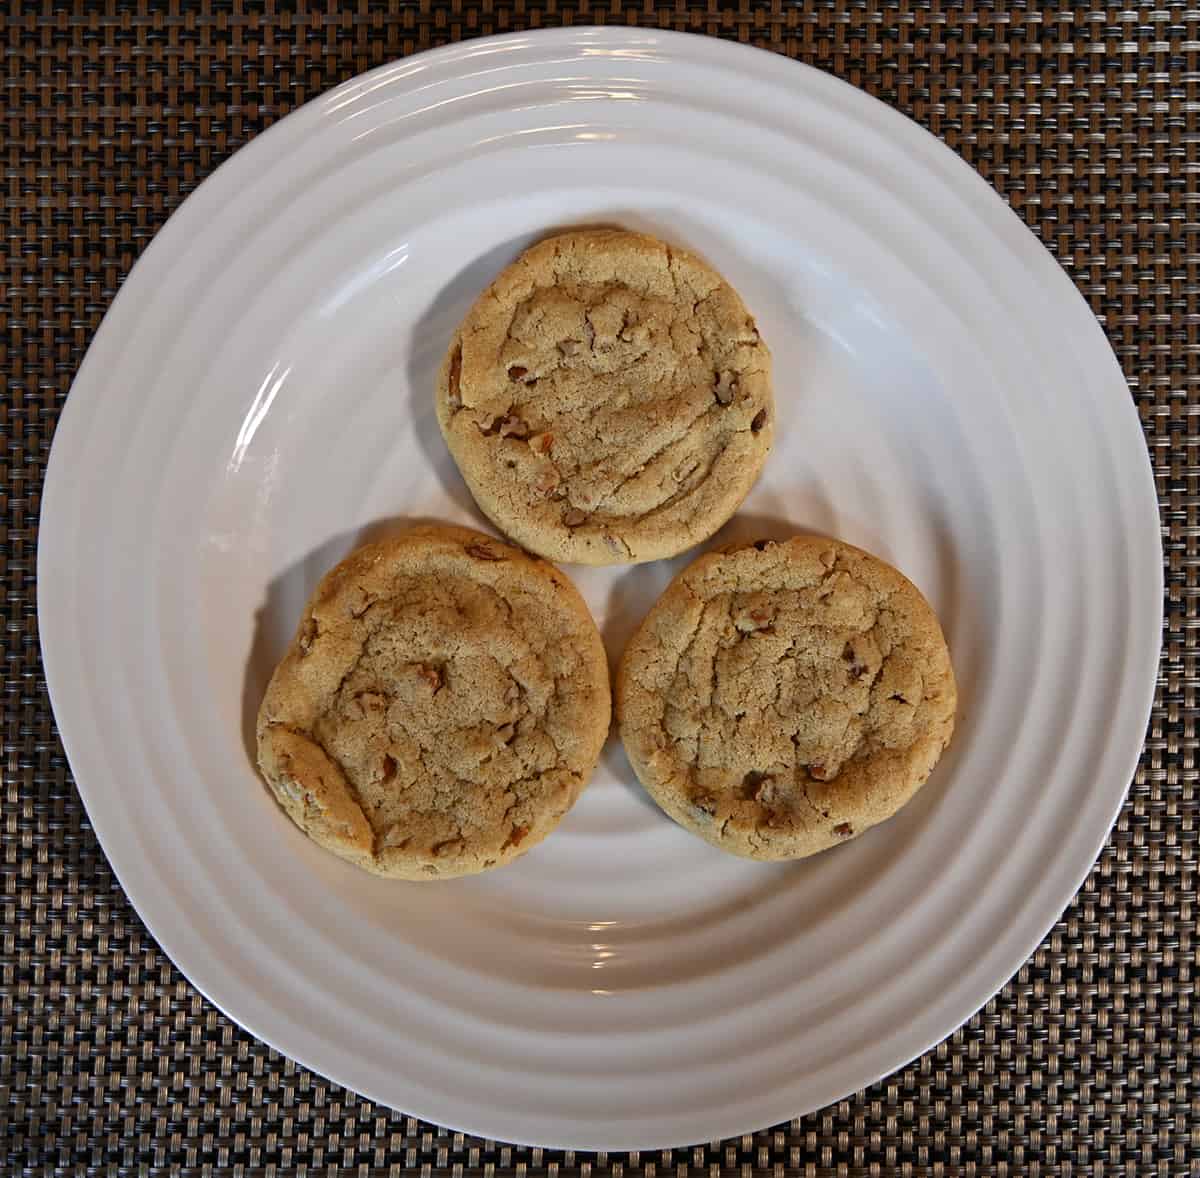 Top down image of three cookies on a white plate.